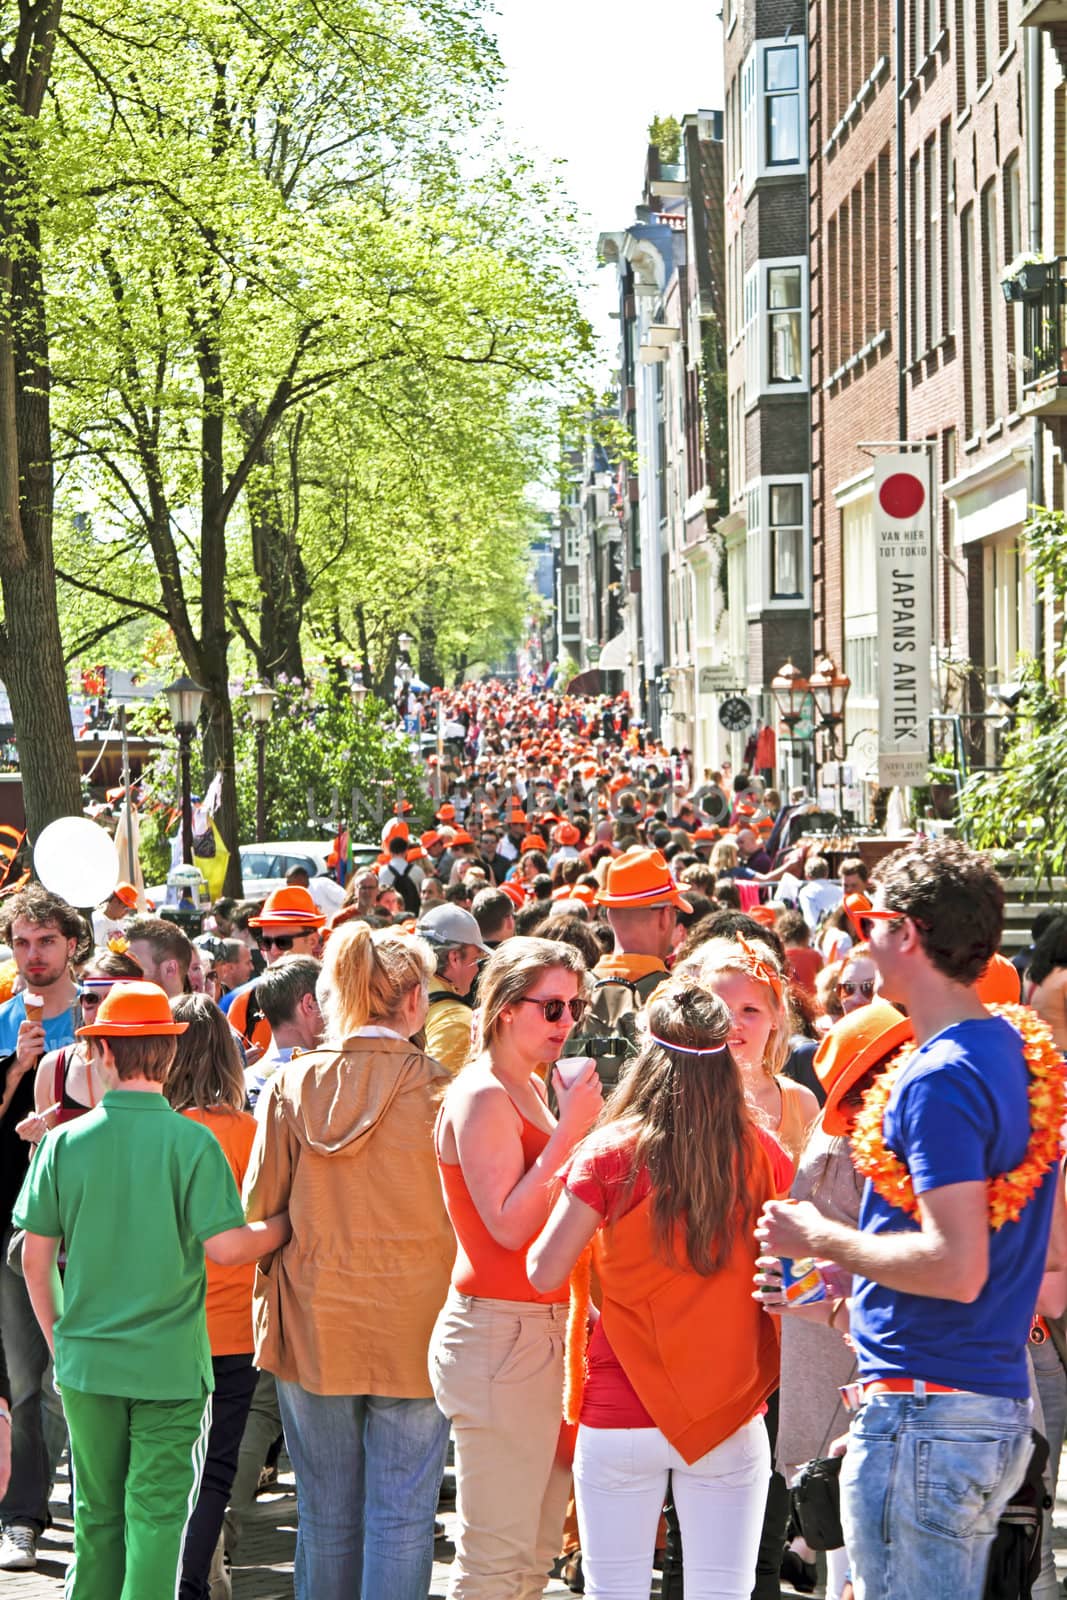 AMSTERDAM - APRIL 30: Celebration of queensday on April 30, 2012 by devy